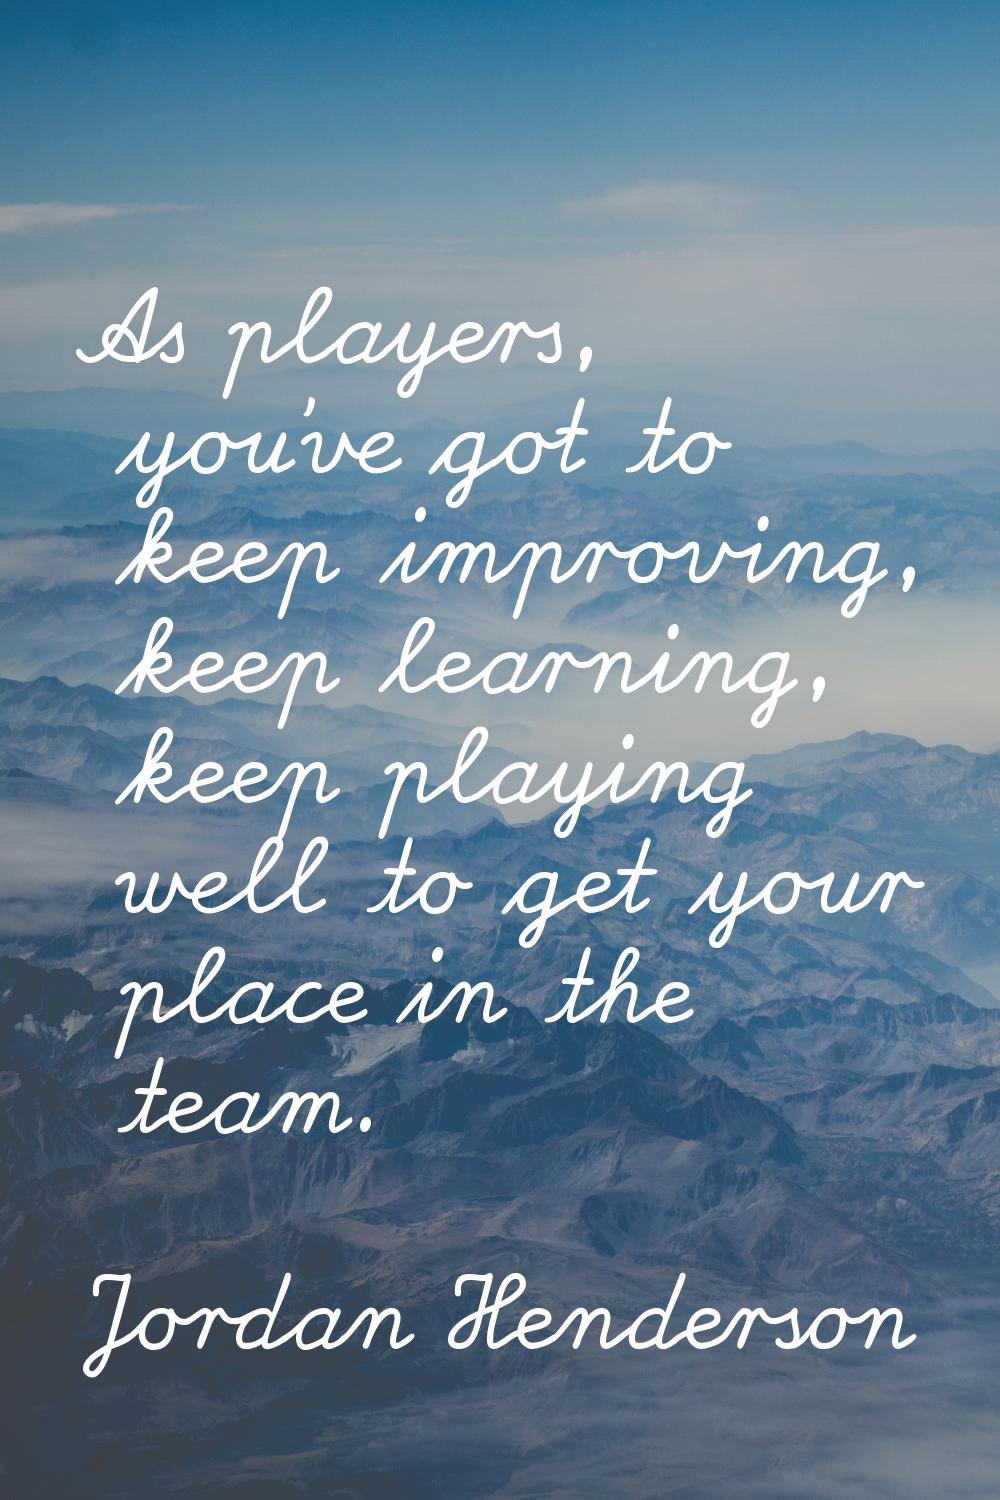 As players, you've got to keep improving, keep learning, keep playing well to get your place in the